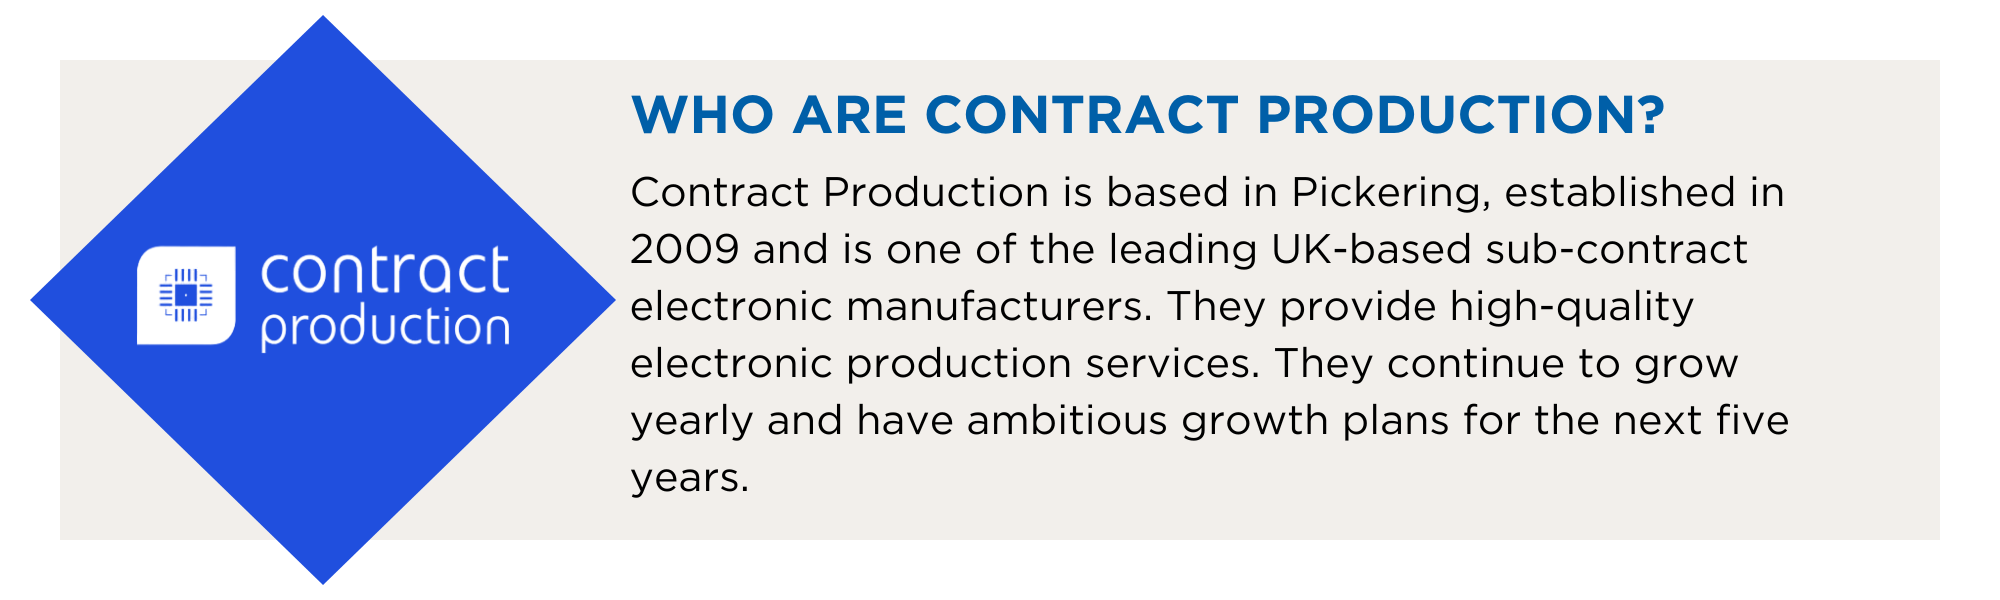 Who are Contract Production?